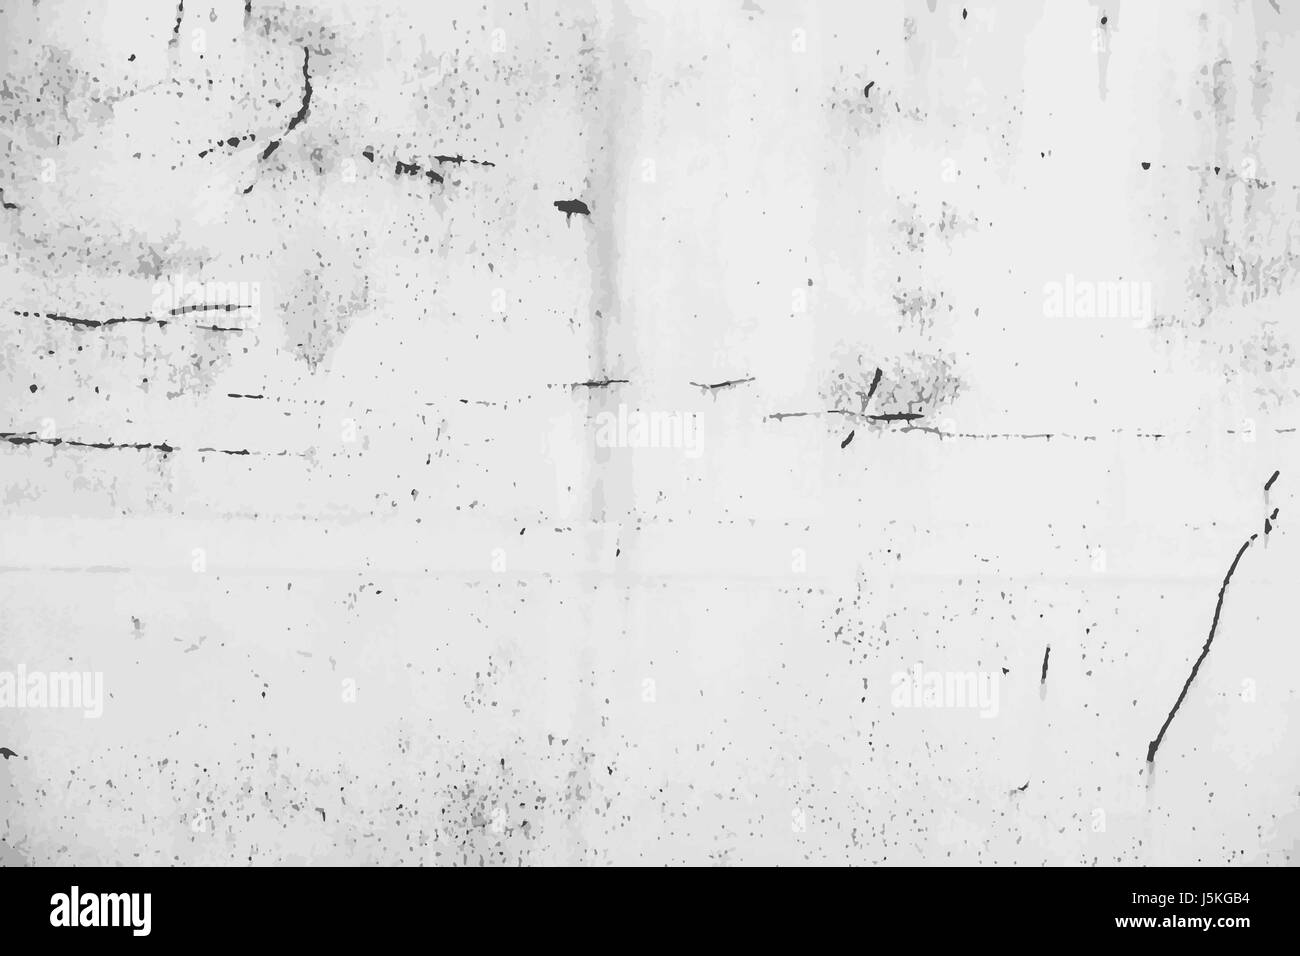 Rusted old metal background with scratches. Grunge black and white vector texture template for overlay artwork. Stock Vector